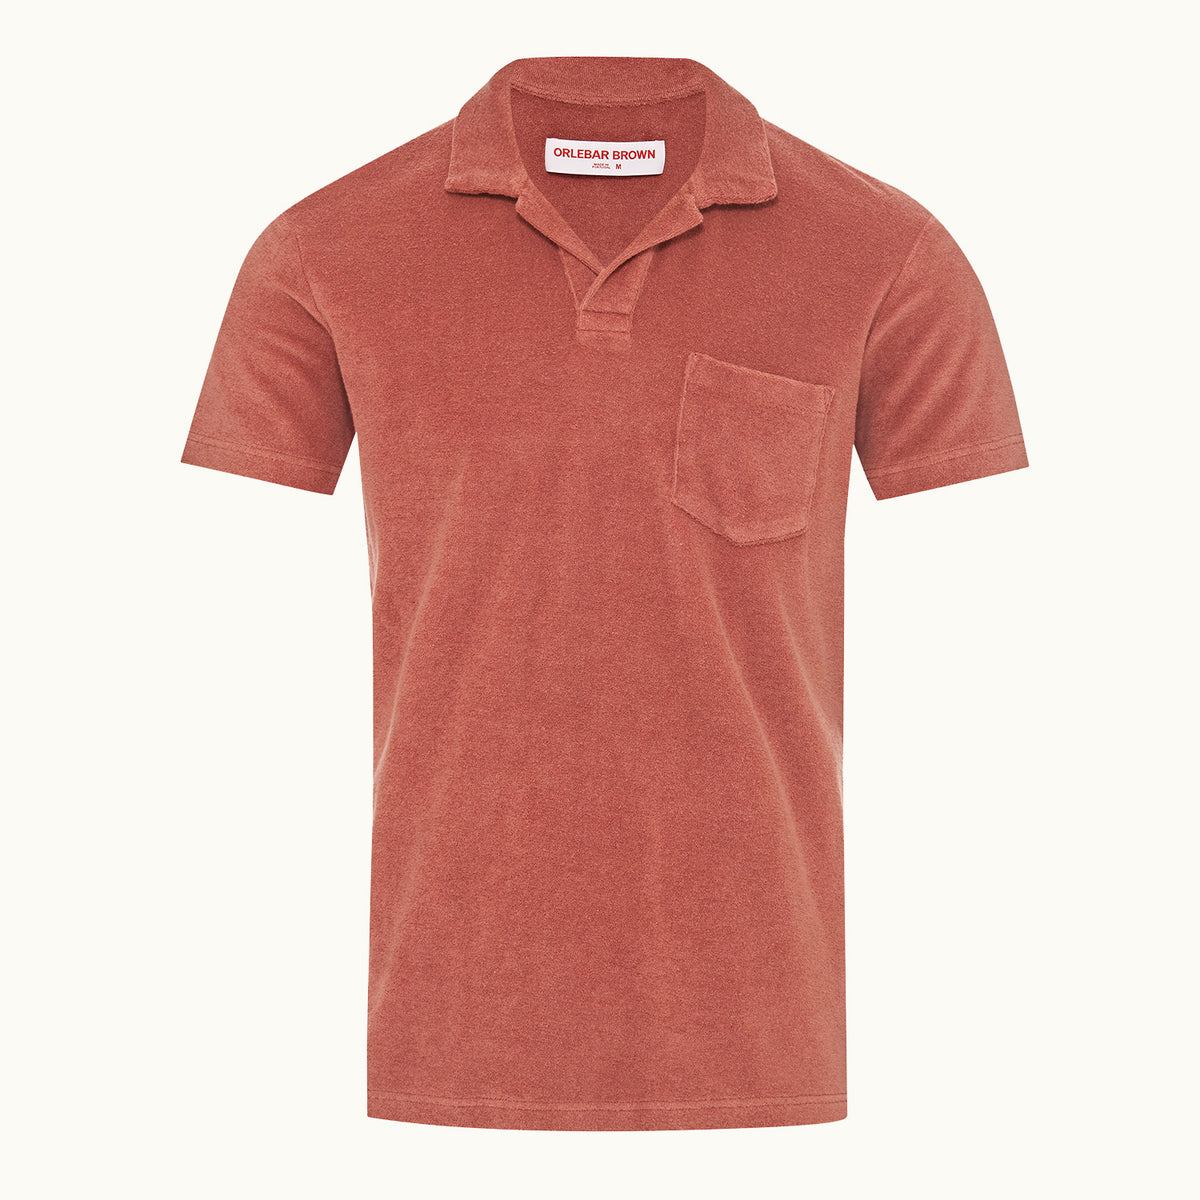 James Bond Terracotta Towelling Polo Shirt - By Orlebar Brown